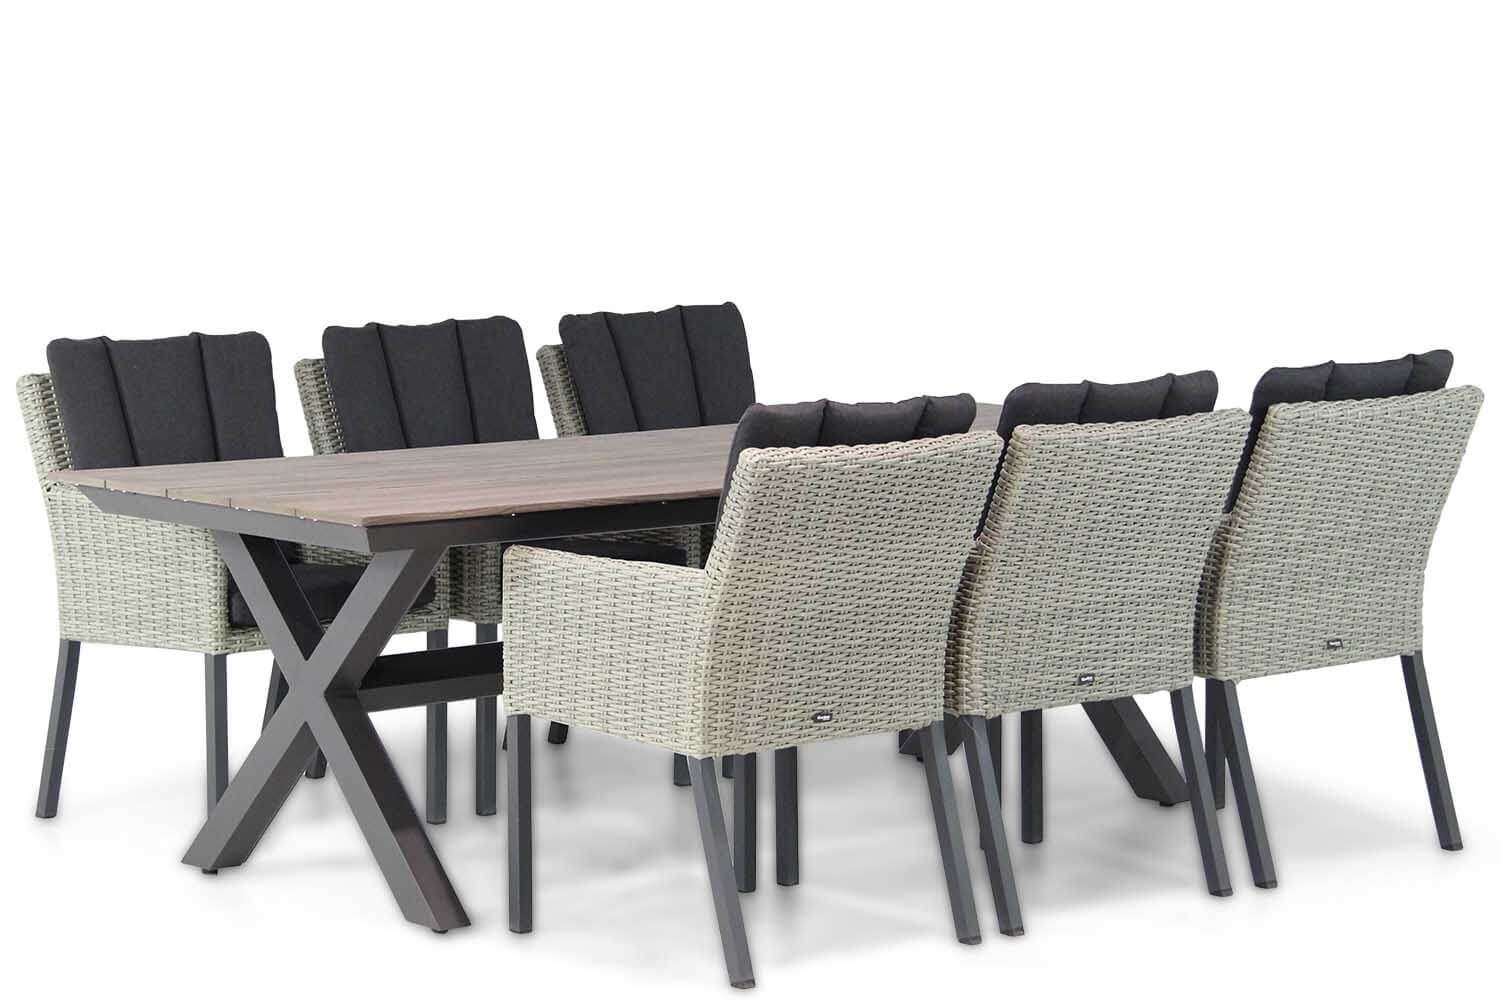 garden collections oxbow wicker dining tuinstoel grey forest tuintafel 240 cm - Garden Collections Oxbow/Forest 240 cm dining tuinset 7-delig